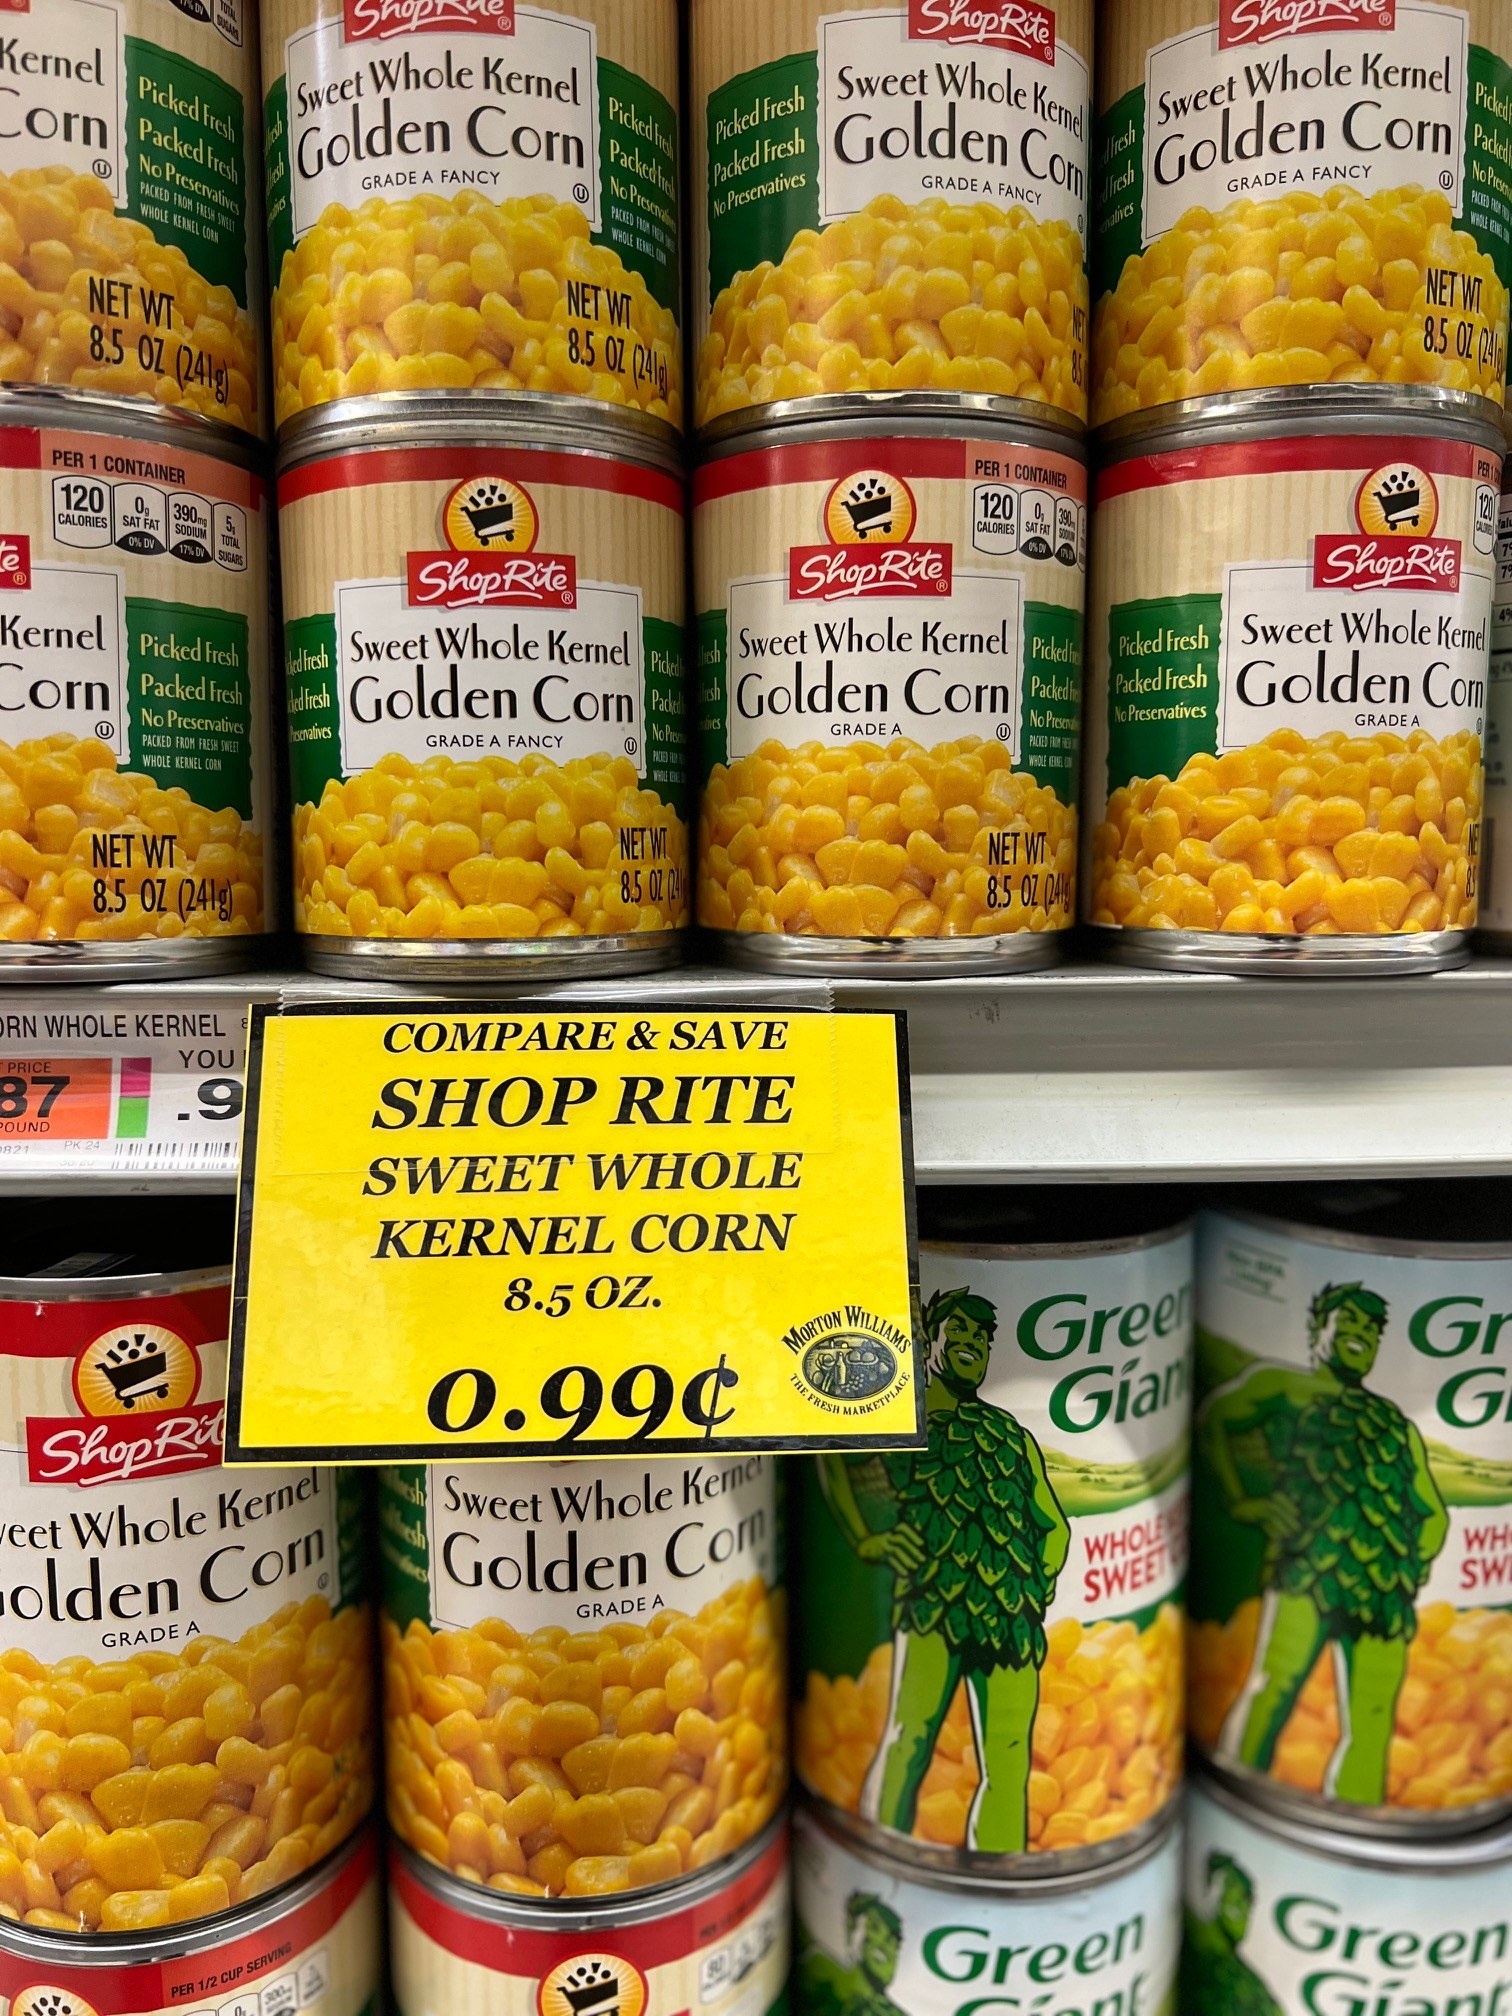 Canned corn on sale